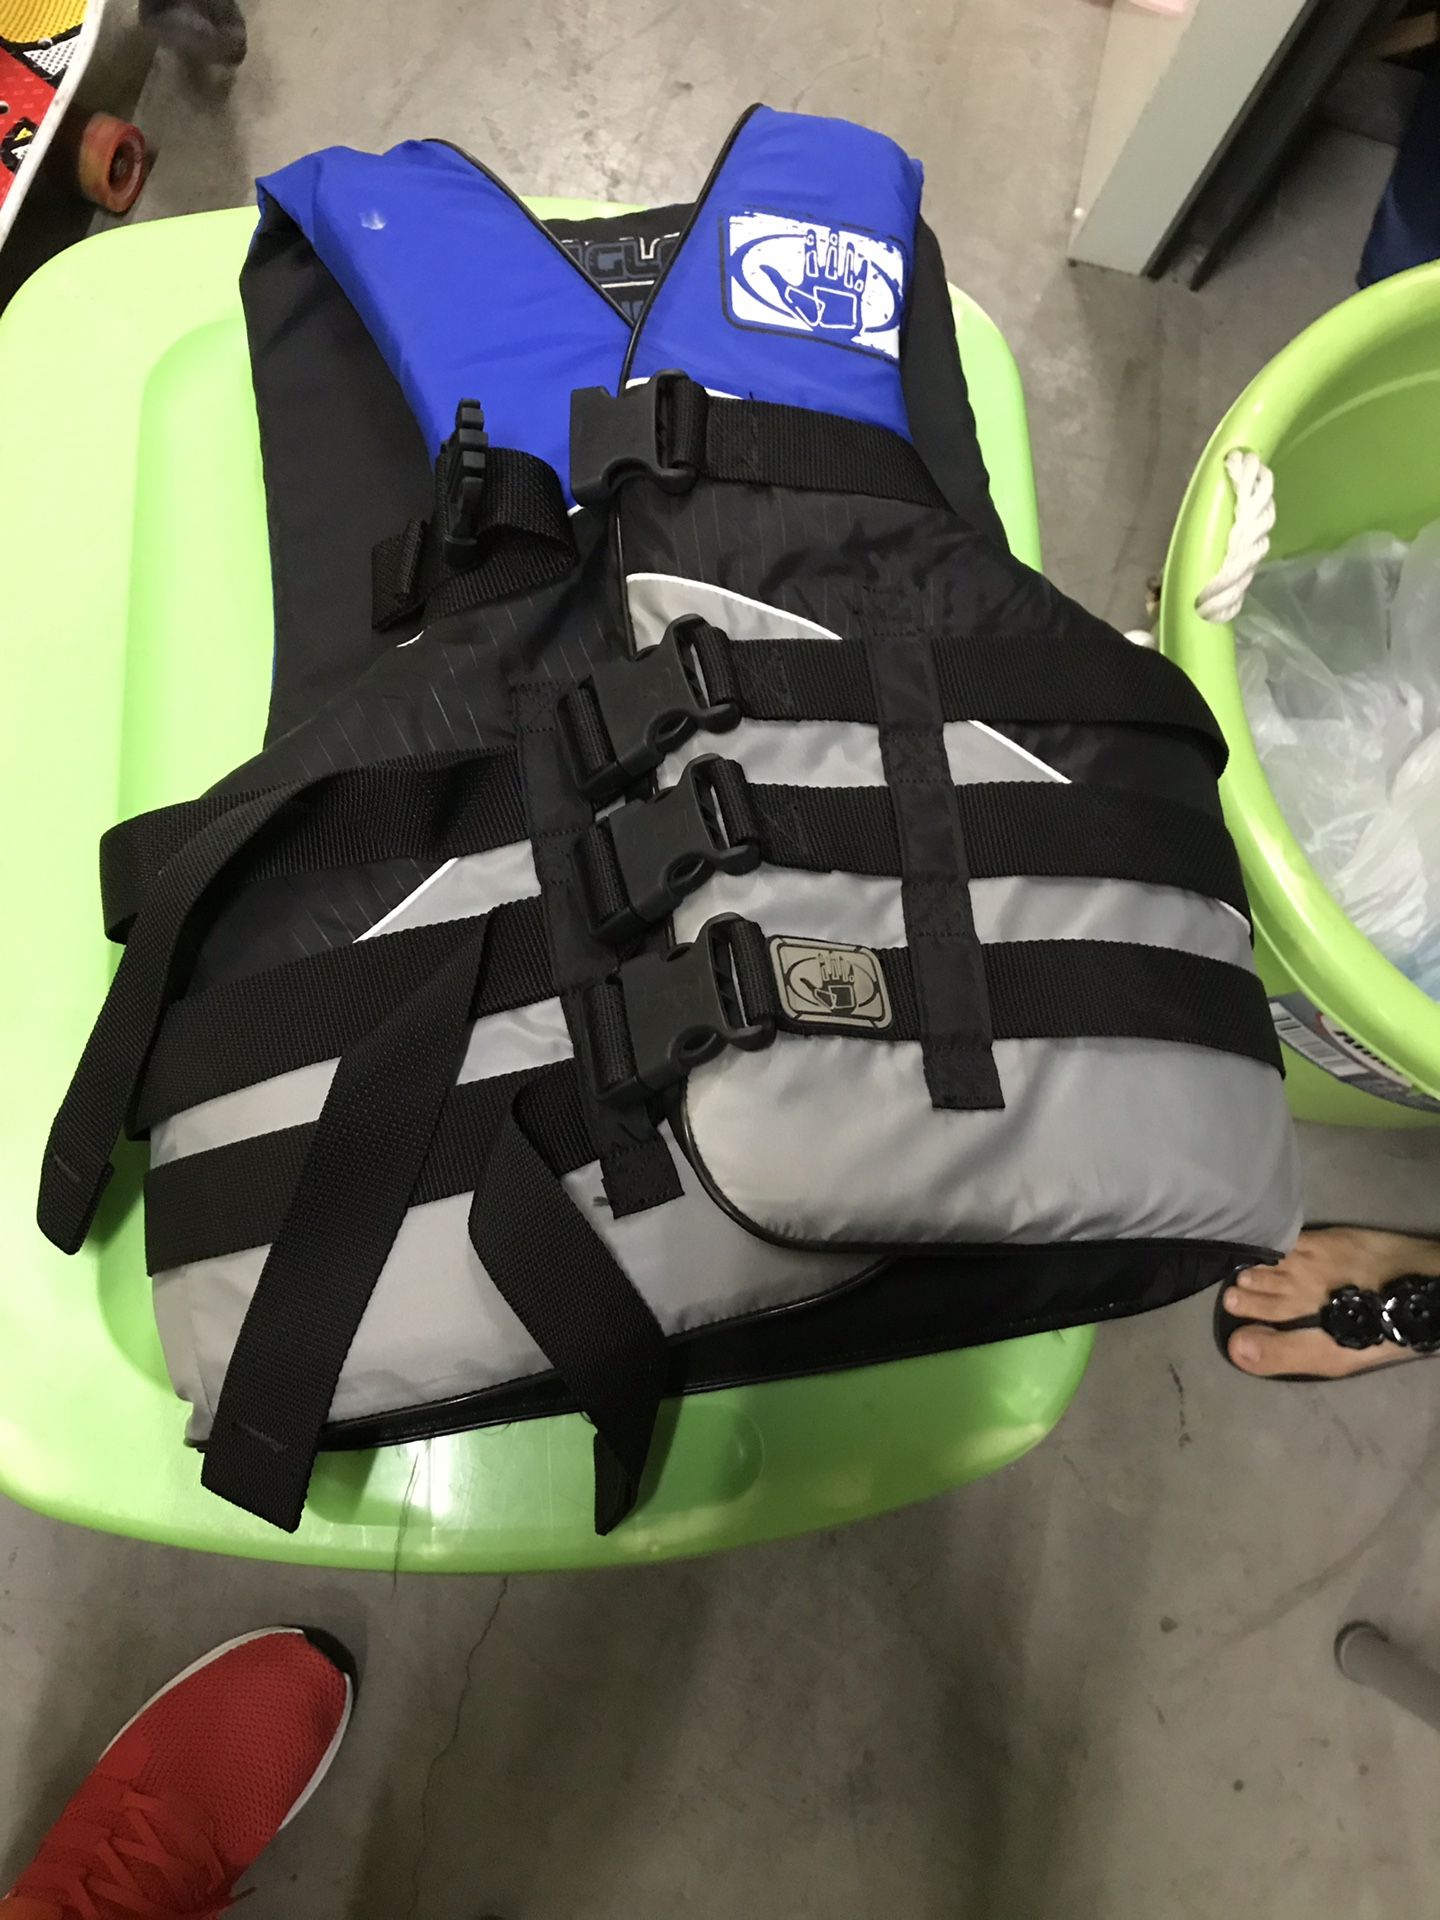 Body Glove adults med life jacket